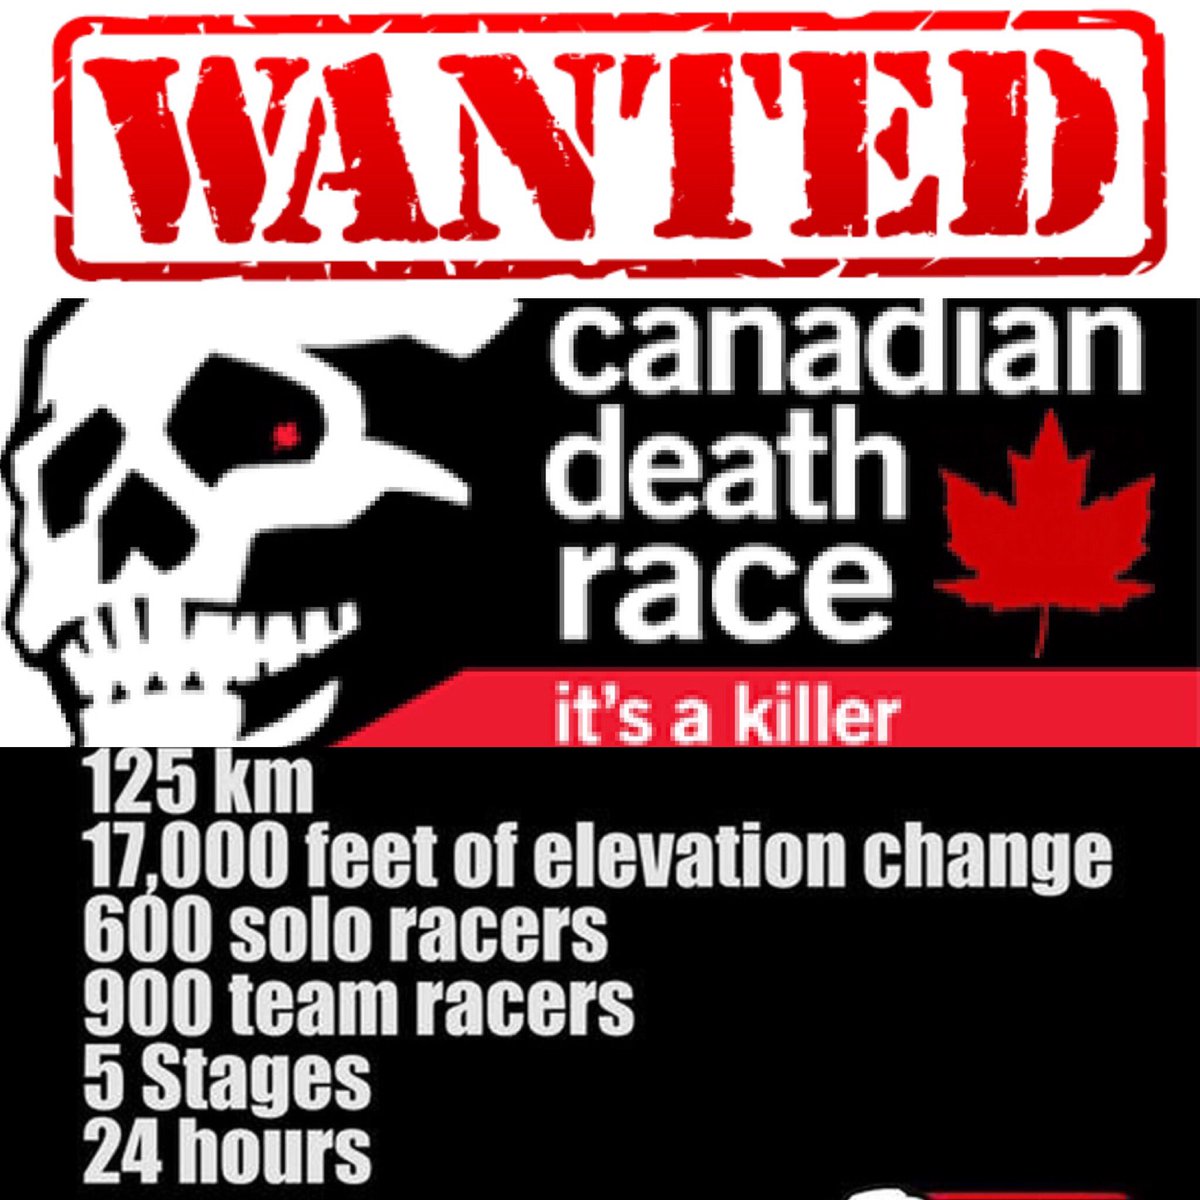 Still need 2 runners to complete our team...who’s in? August 3rd - 6th, Grande Cache, AB #canadiandeathrace #skulltatoowhendone #run #runners